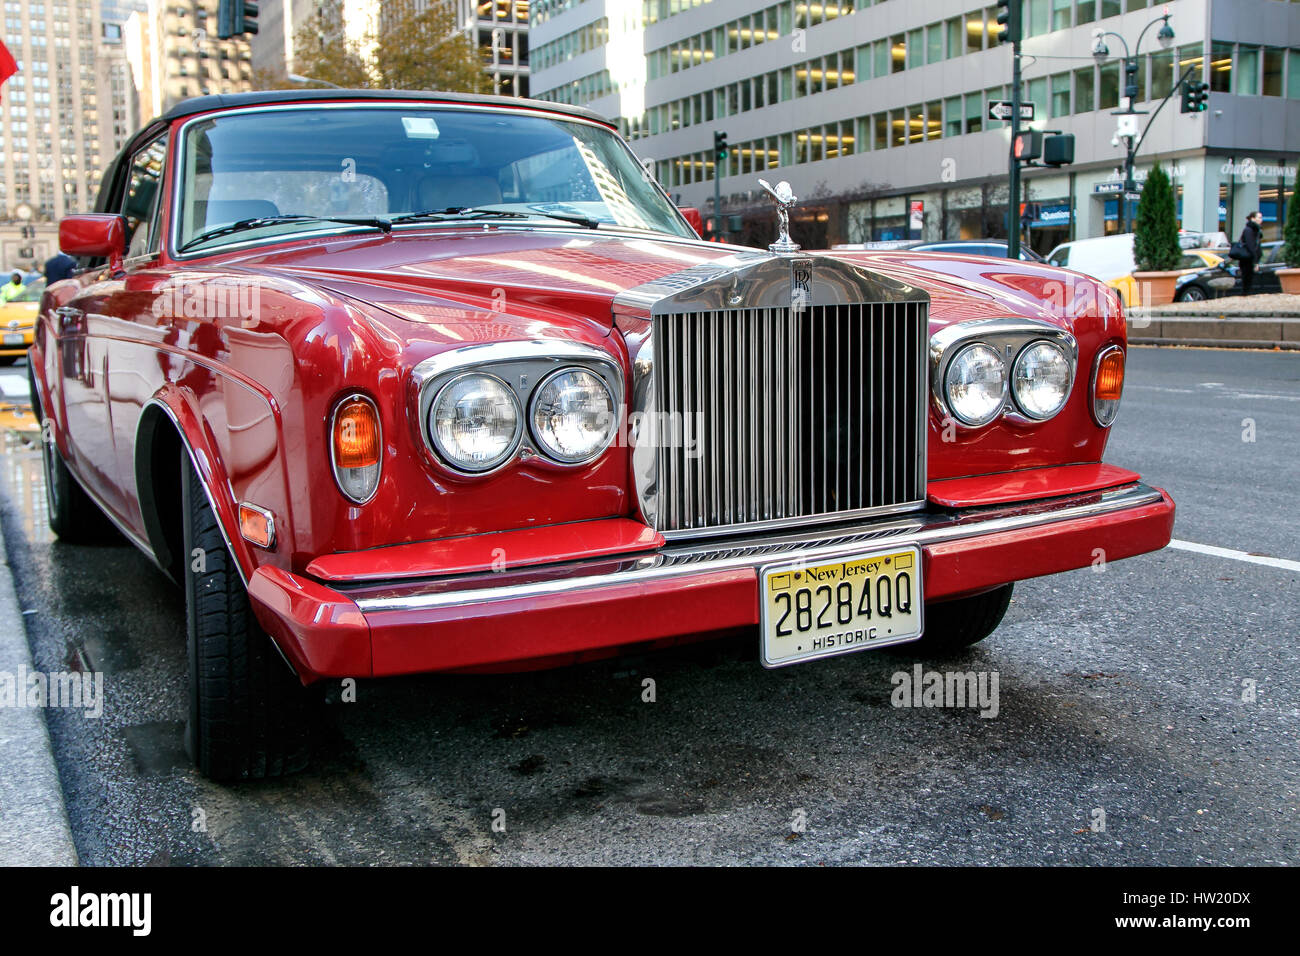 New York, December 1, 2016: A red Rolls Royce is parked on Park Avenue in Manhattan. Stock Photo